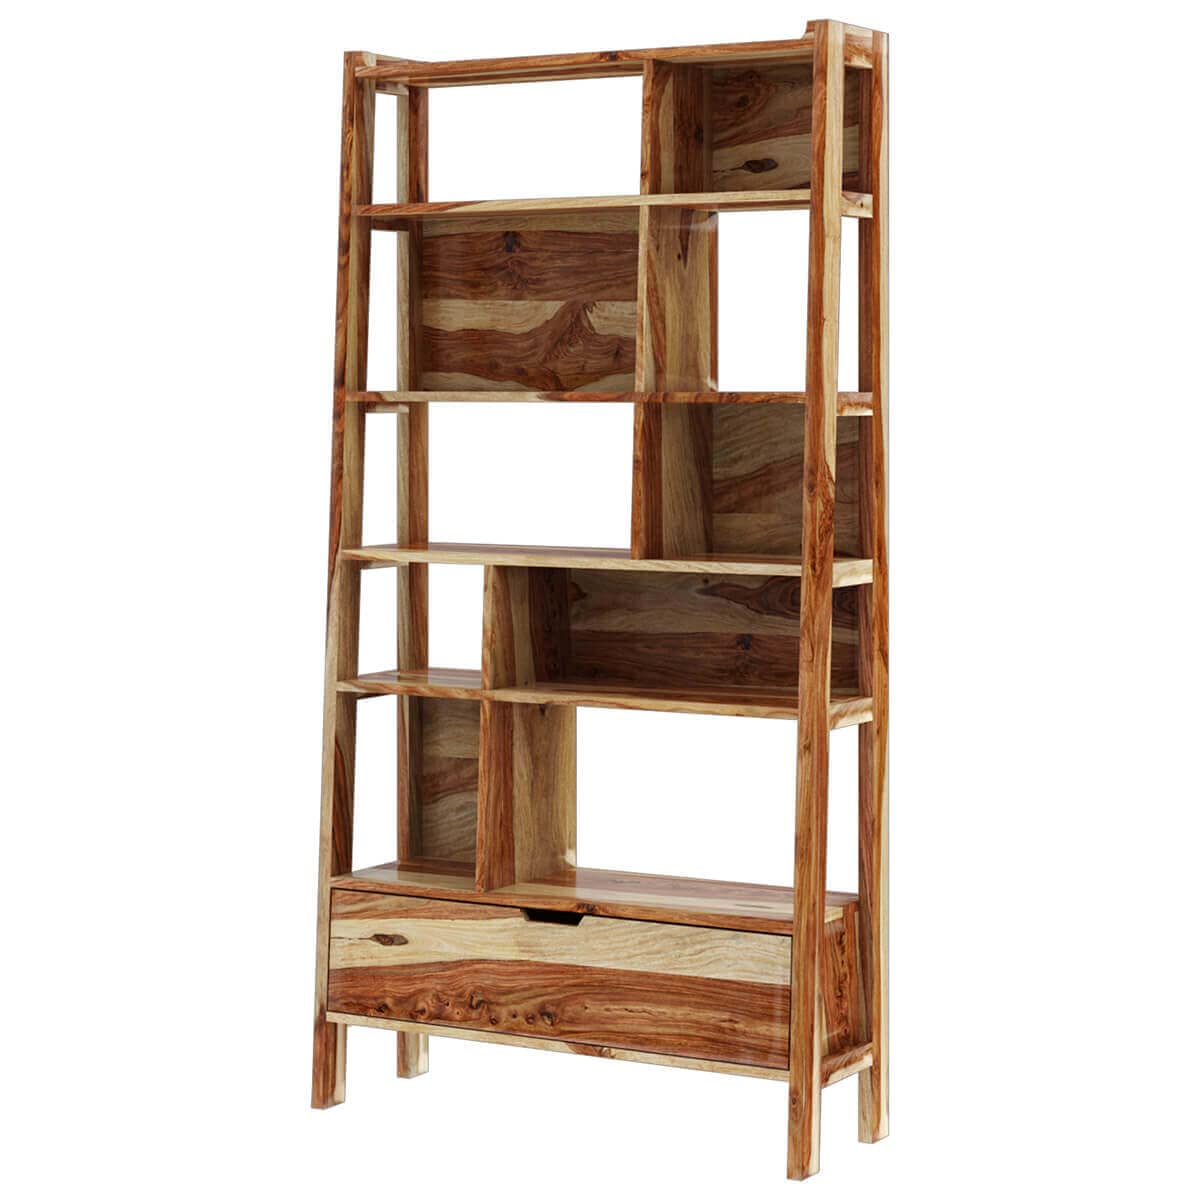 Woodmarwar Solid Sheesham Wood Book Shelf Wooden | Bookshelf for Home Library | Book Shelves Open Bookcase Books Rack | Display Unit Book Stand with 10 Shelf & 1 Drawer Storage for Office & Home | Natural Brown Finish